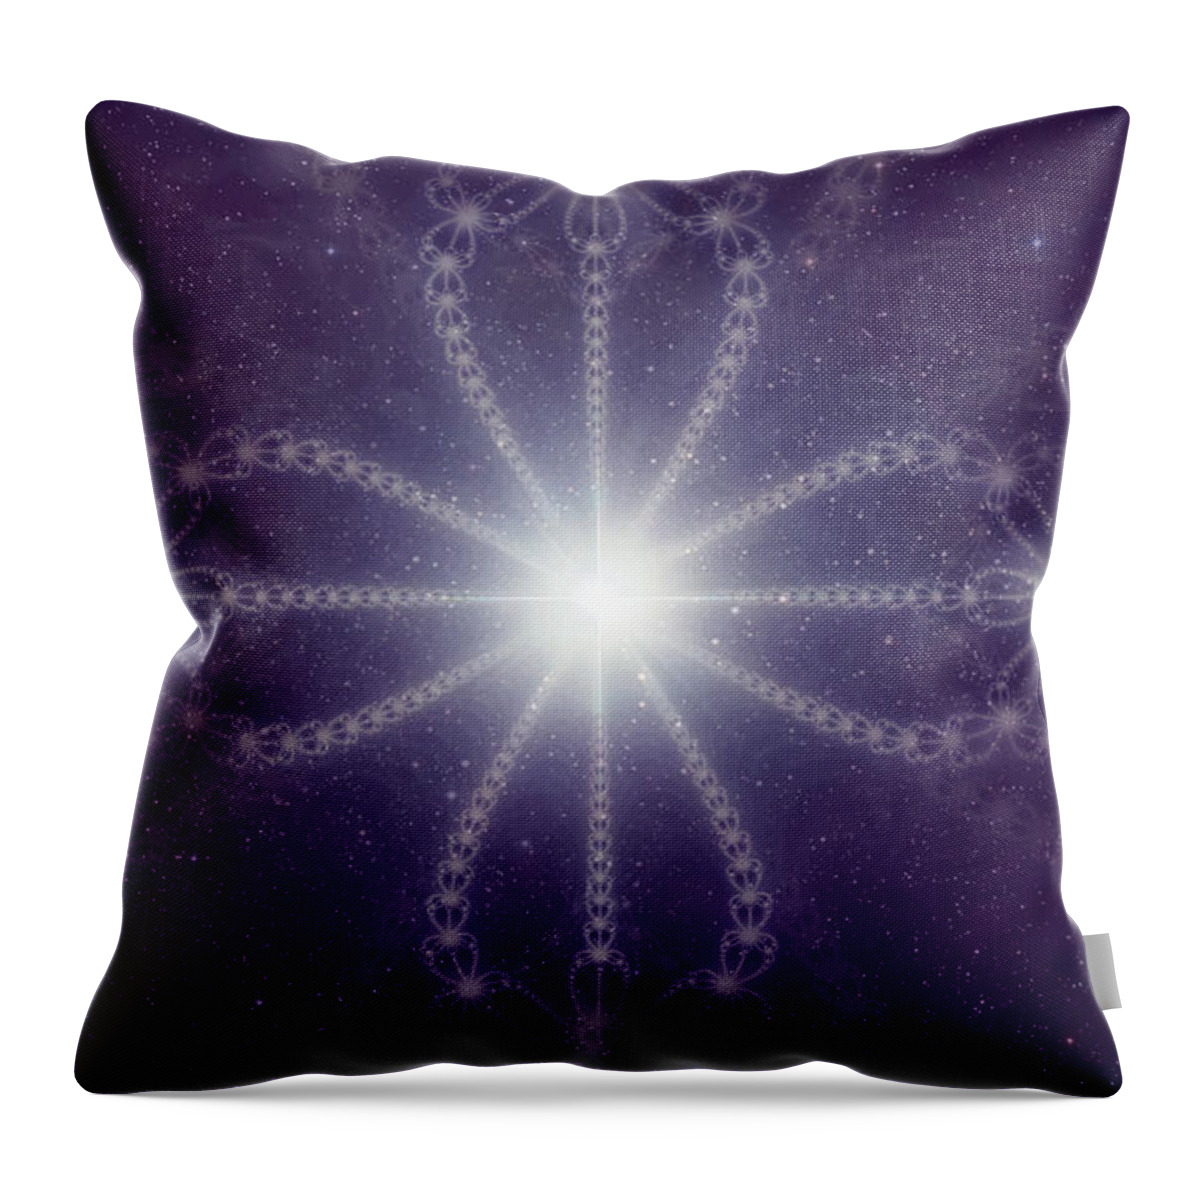 Stars Throw Pillow featuring the photograph The Language Of The Stars by Michal Sornat